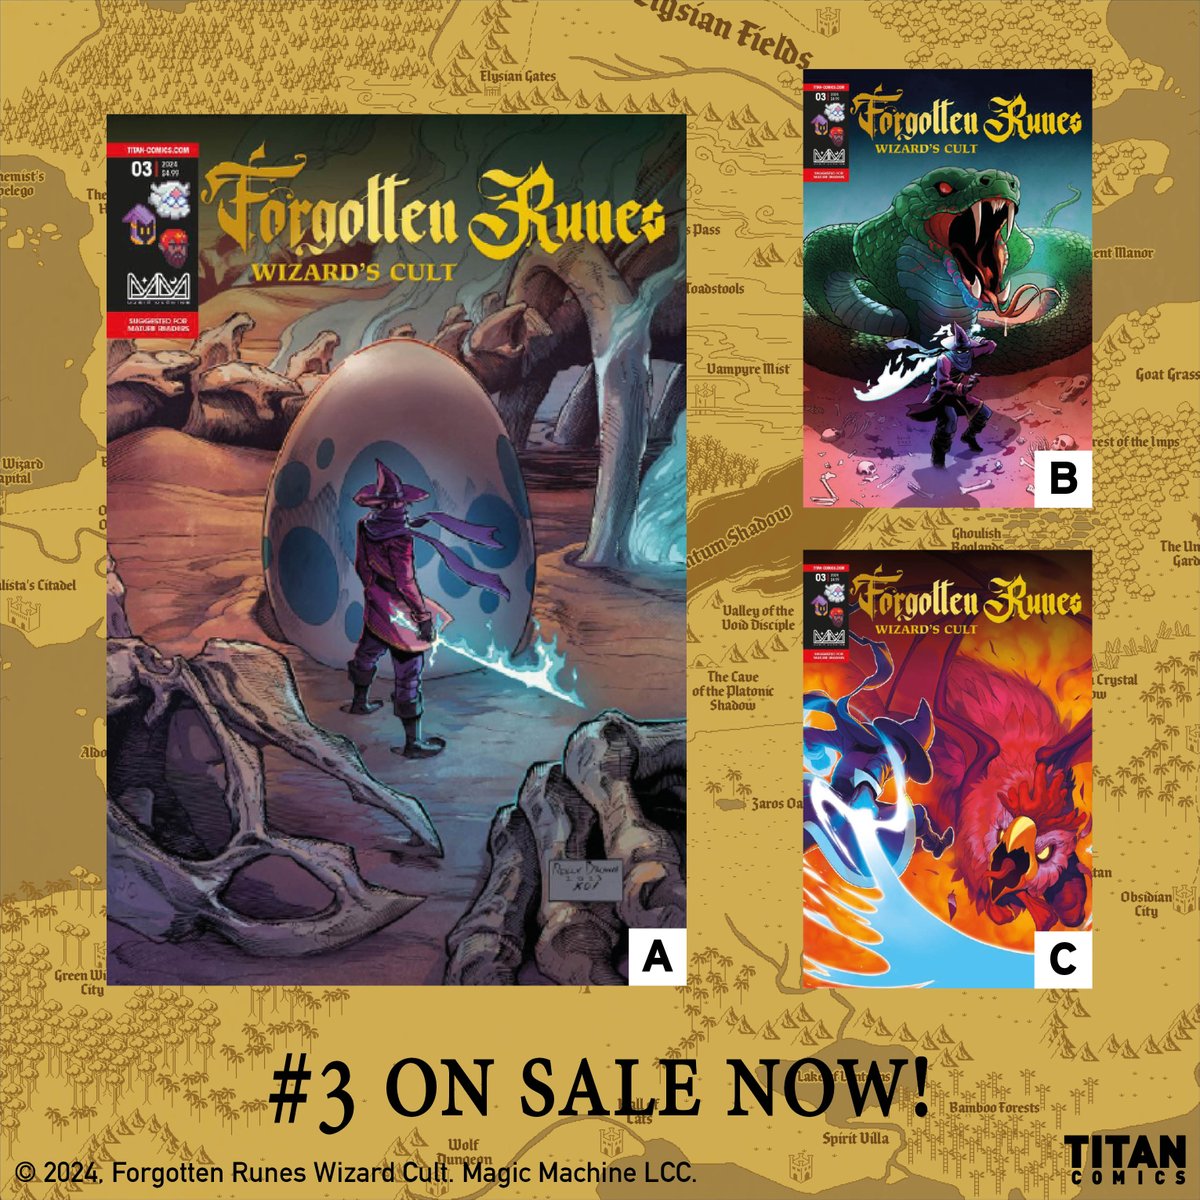 On sale NOW is FORGOTTEN RUNES: WIZARD'S CULT #3 from Joe Joe Rechtman (W) and @reilly_brown (A). Who is CHRONOMANCER GEORGE OF DREAMS and what is he trying to tell the reader?